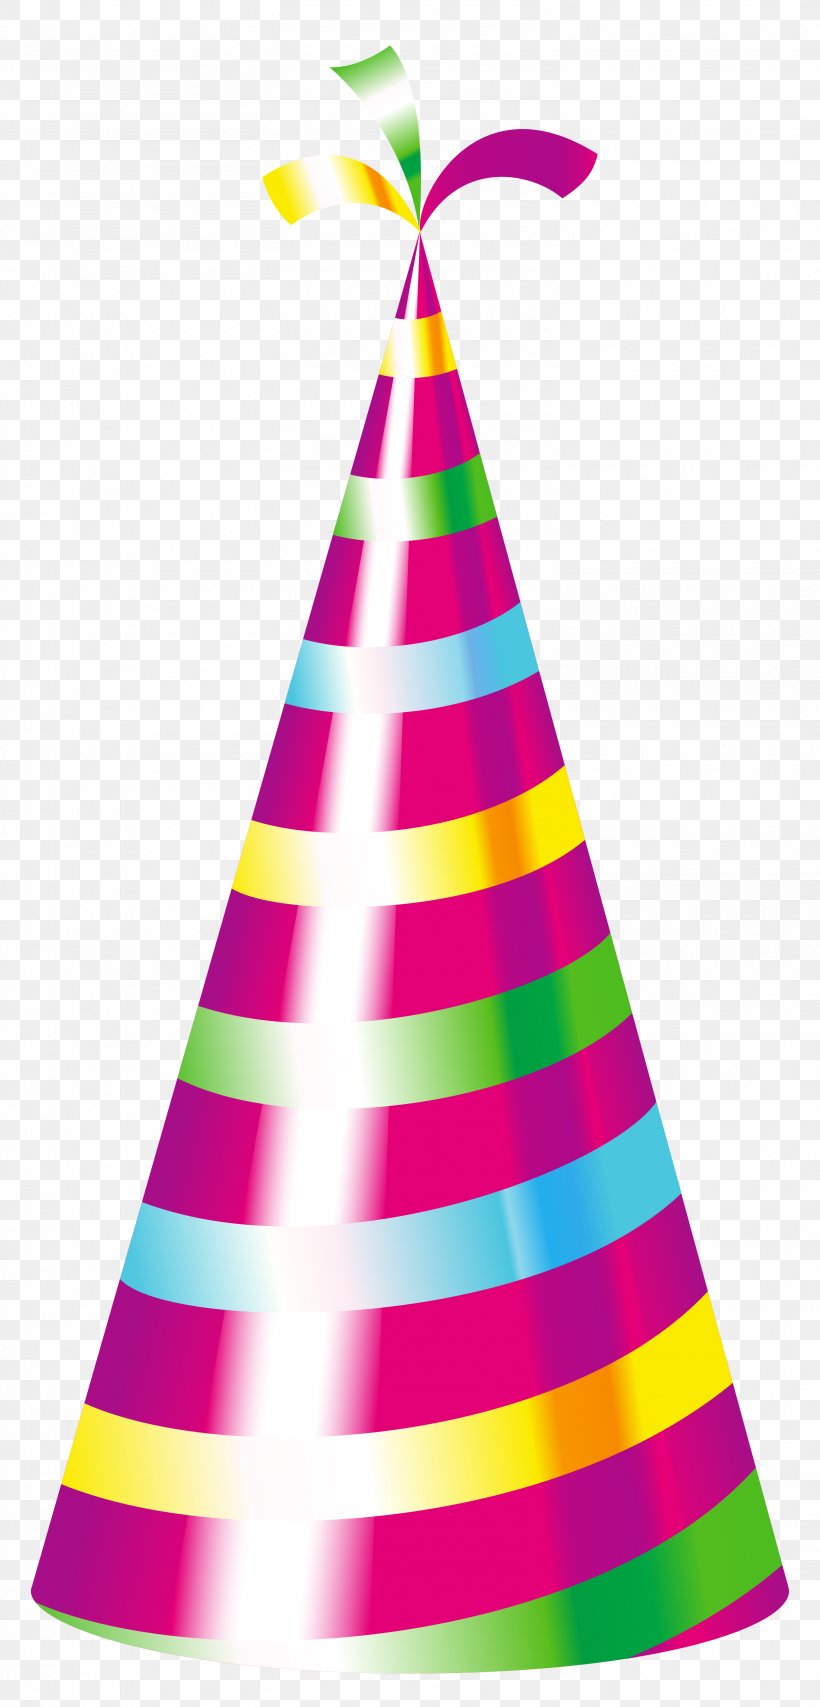 Birthday Cake Party Hat Clip Art, PNG, 3015x6279px, Birthday Cake, Birthday, Cap, Christmas Decoration, Christmas Ornament Download Free